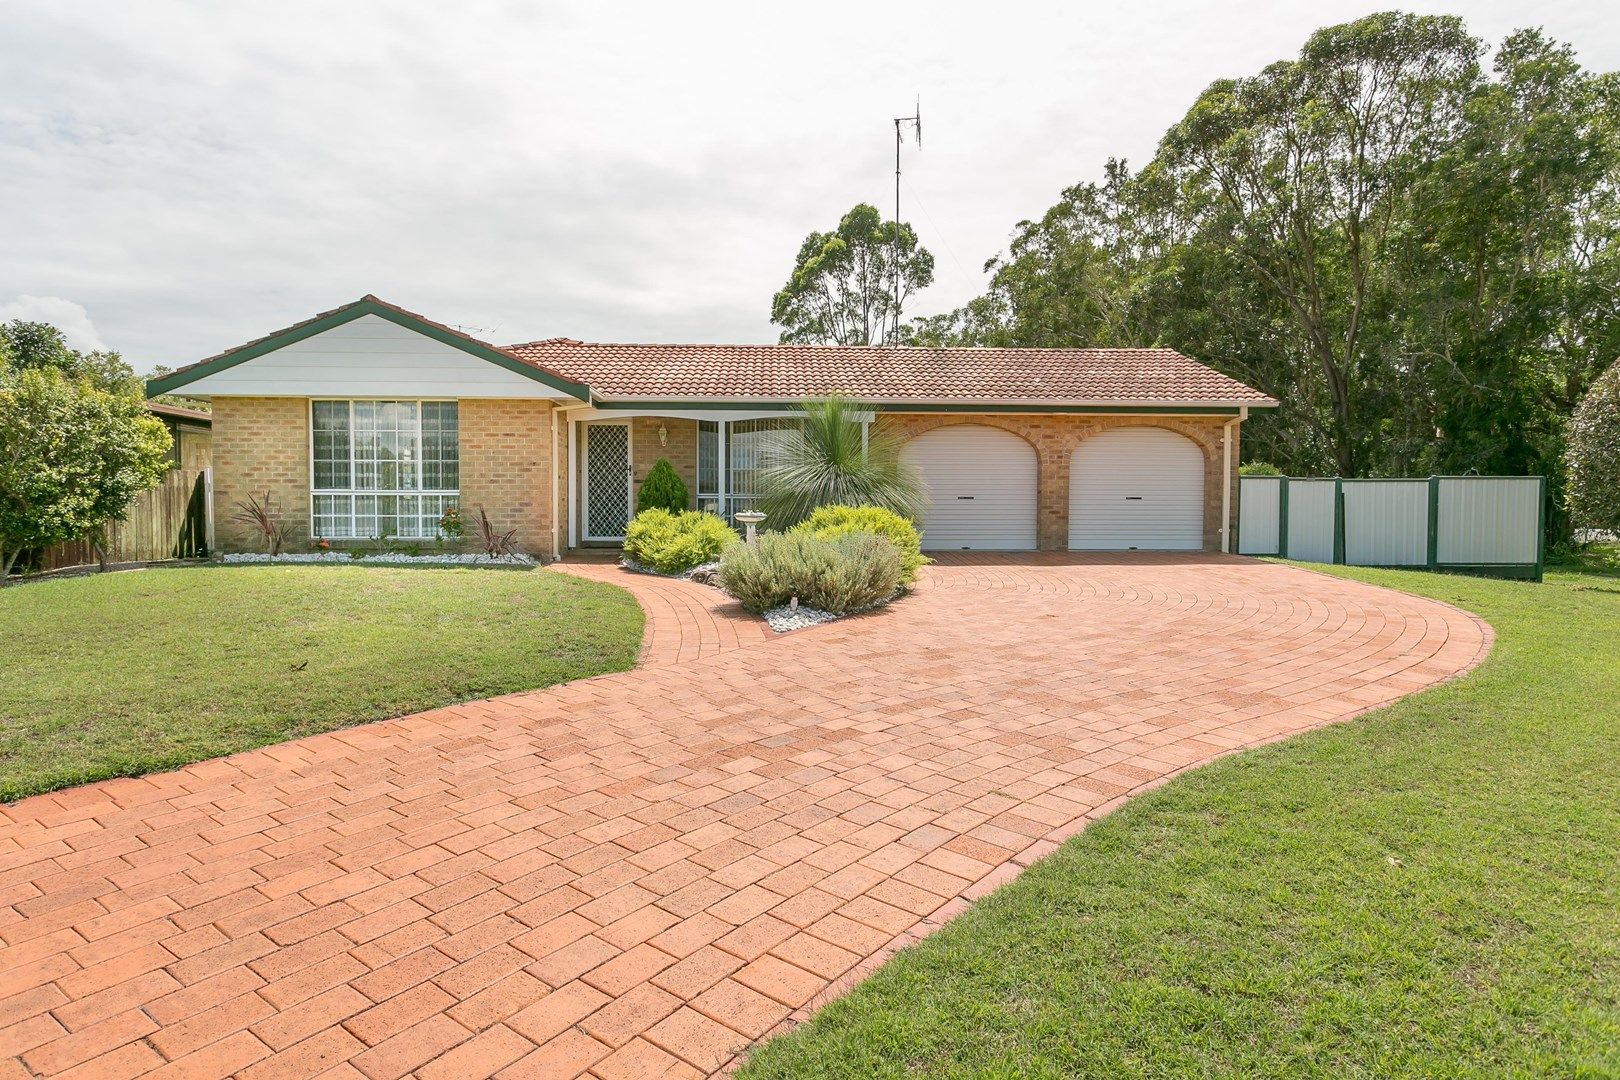 30 Murray Avenue, Forster NSW 2428